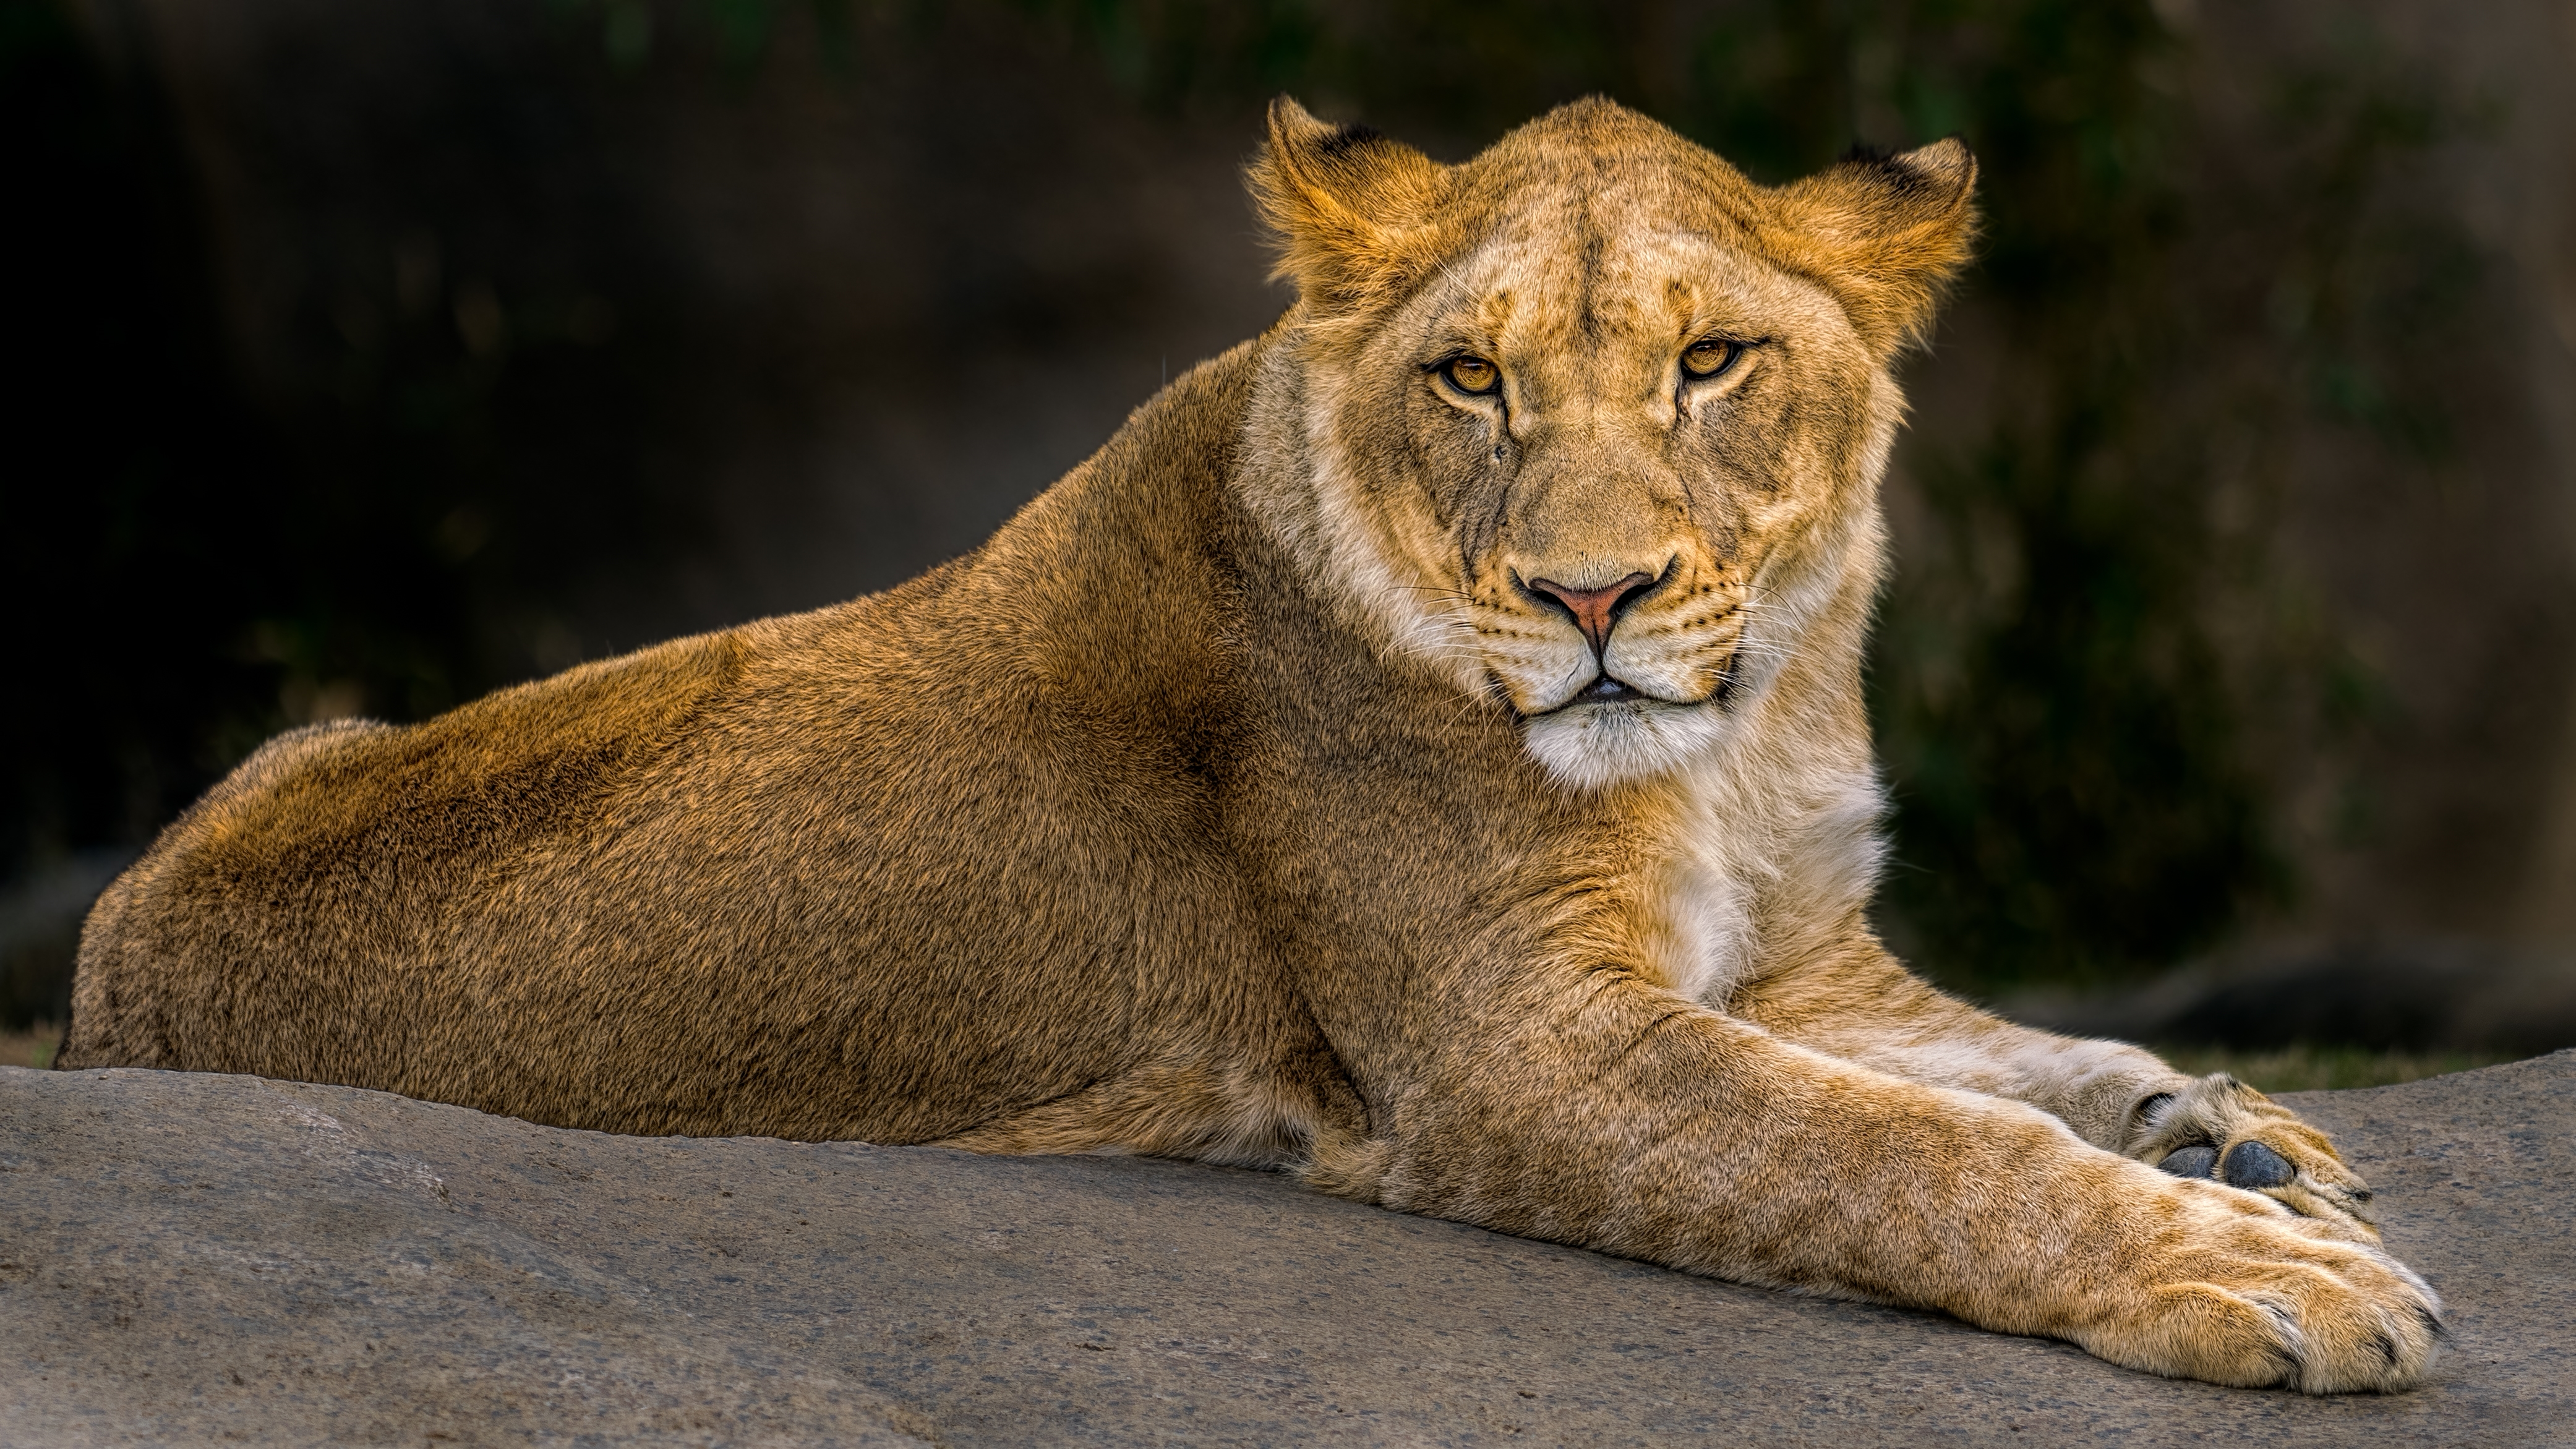 A lioness at rest